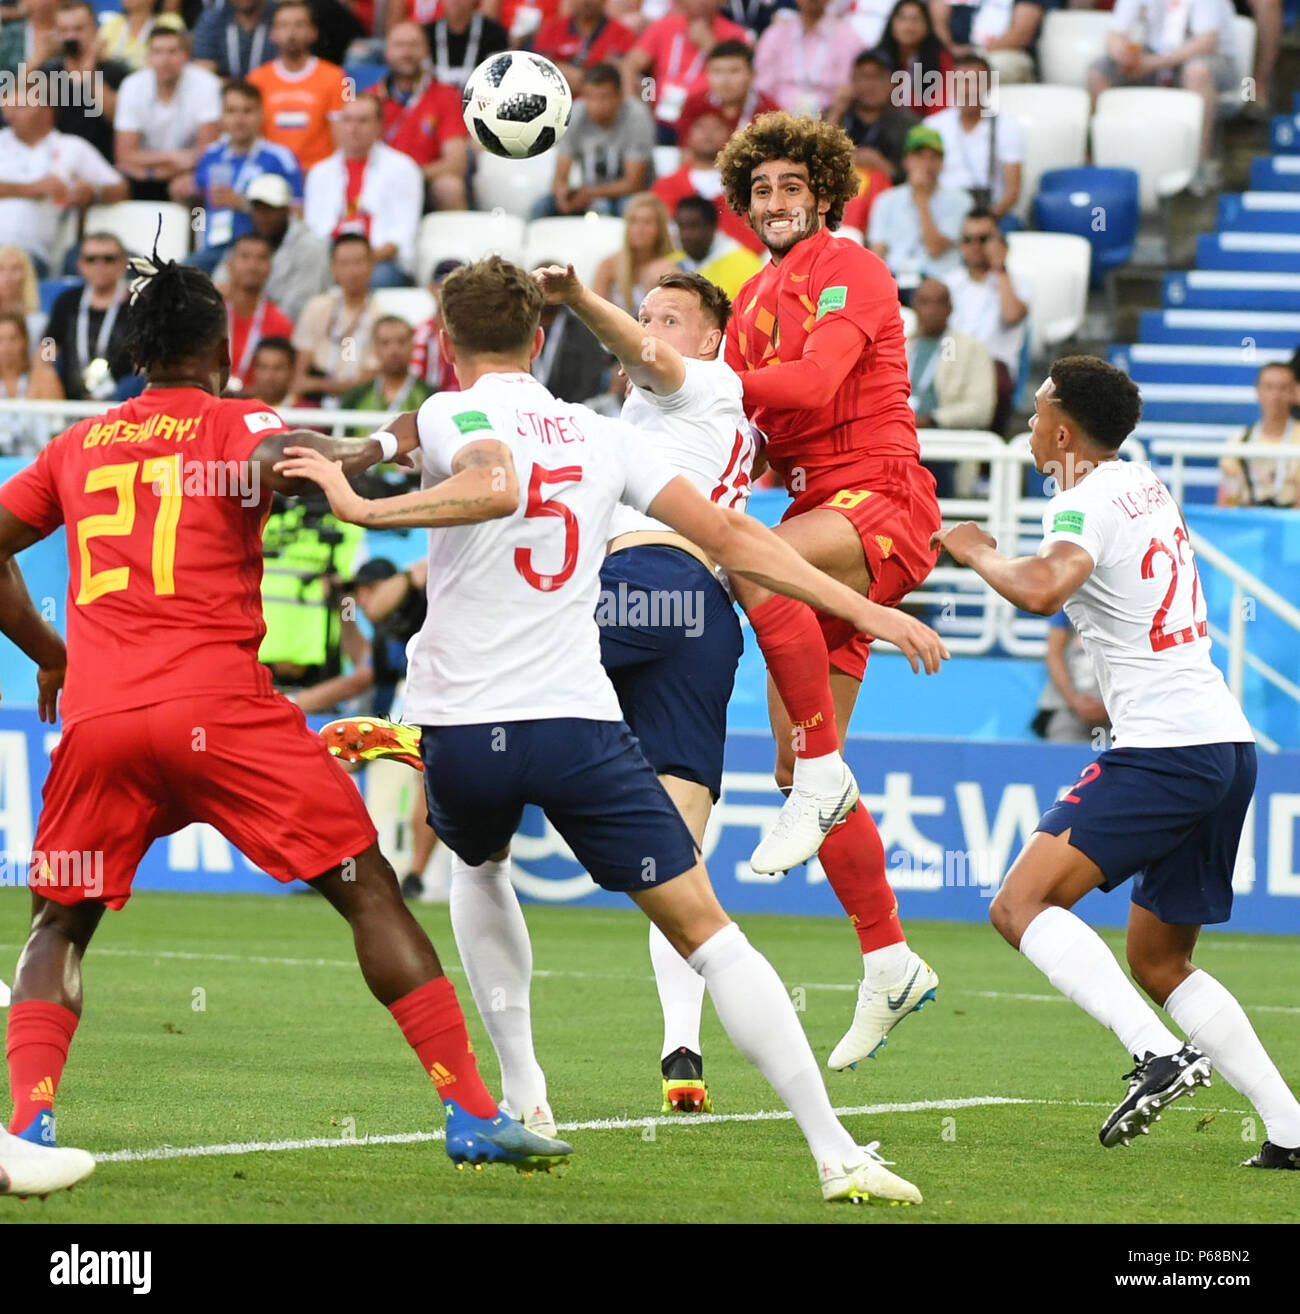 Kaliningrad, Russia. 28th June, 2018. Phil Jones (C) of England vies with Marouane Fellaini (2nd R) of Belgium during the 2018 FIFA World Cup Group G match between England and Belgium in Kaliningrad, Russia, June 28, 2018. Credit: Du Yu/Xinhua/Alamy Live News Stock Photo